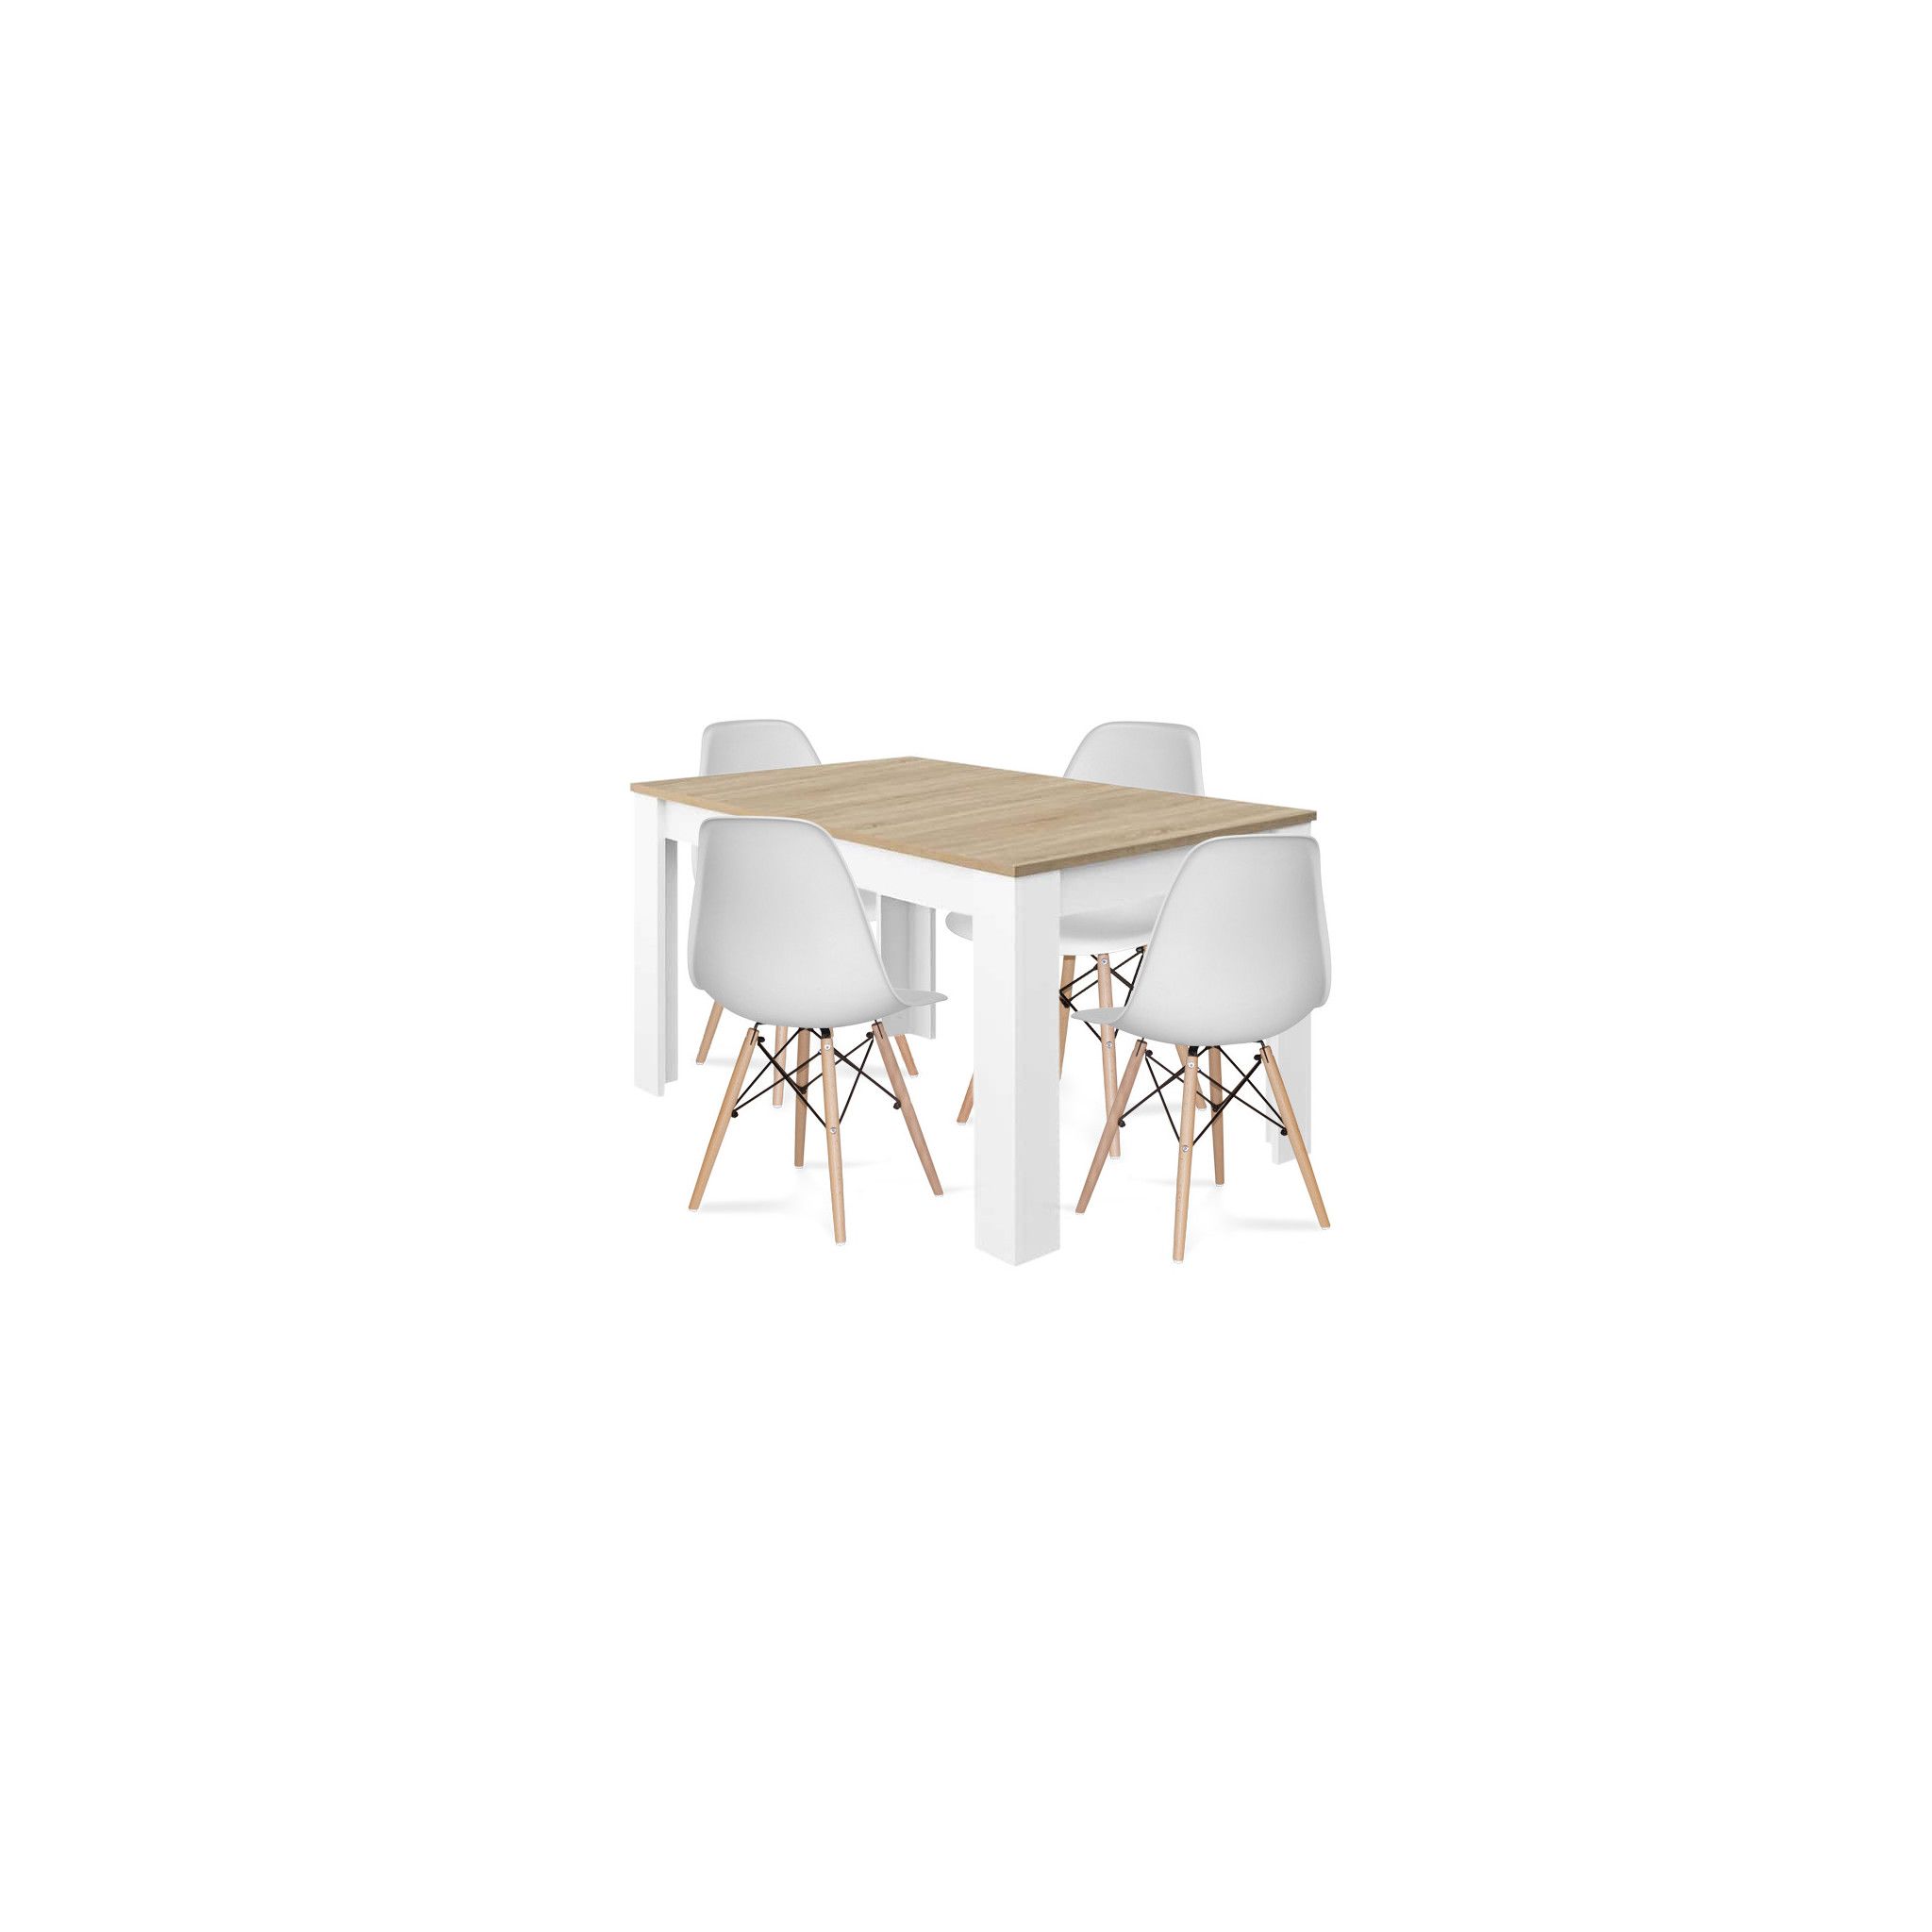 PACK TABLE EXTENSIBLE NORDIK ET 4 CHAISES TOWER WOOD BLANCHES